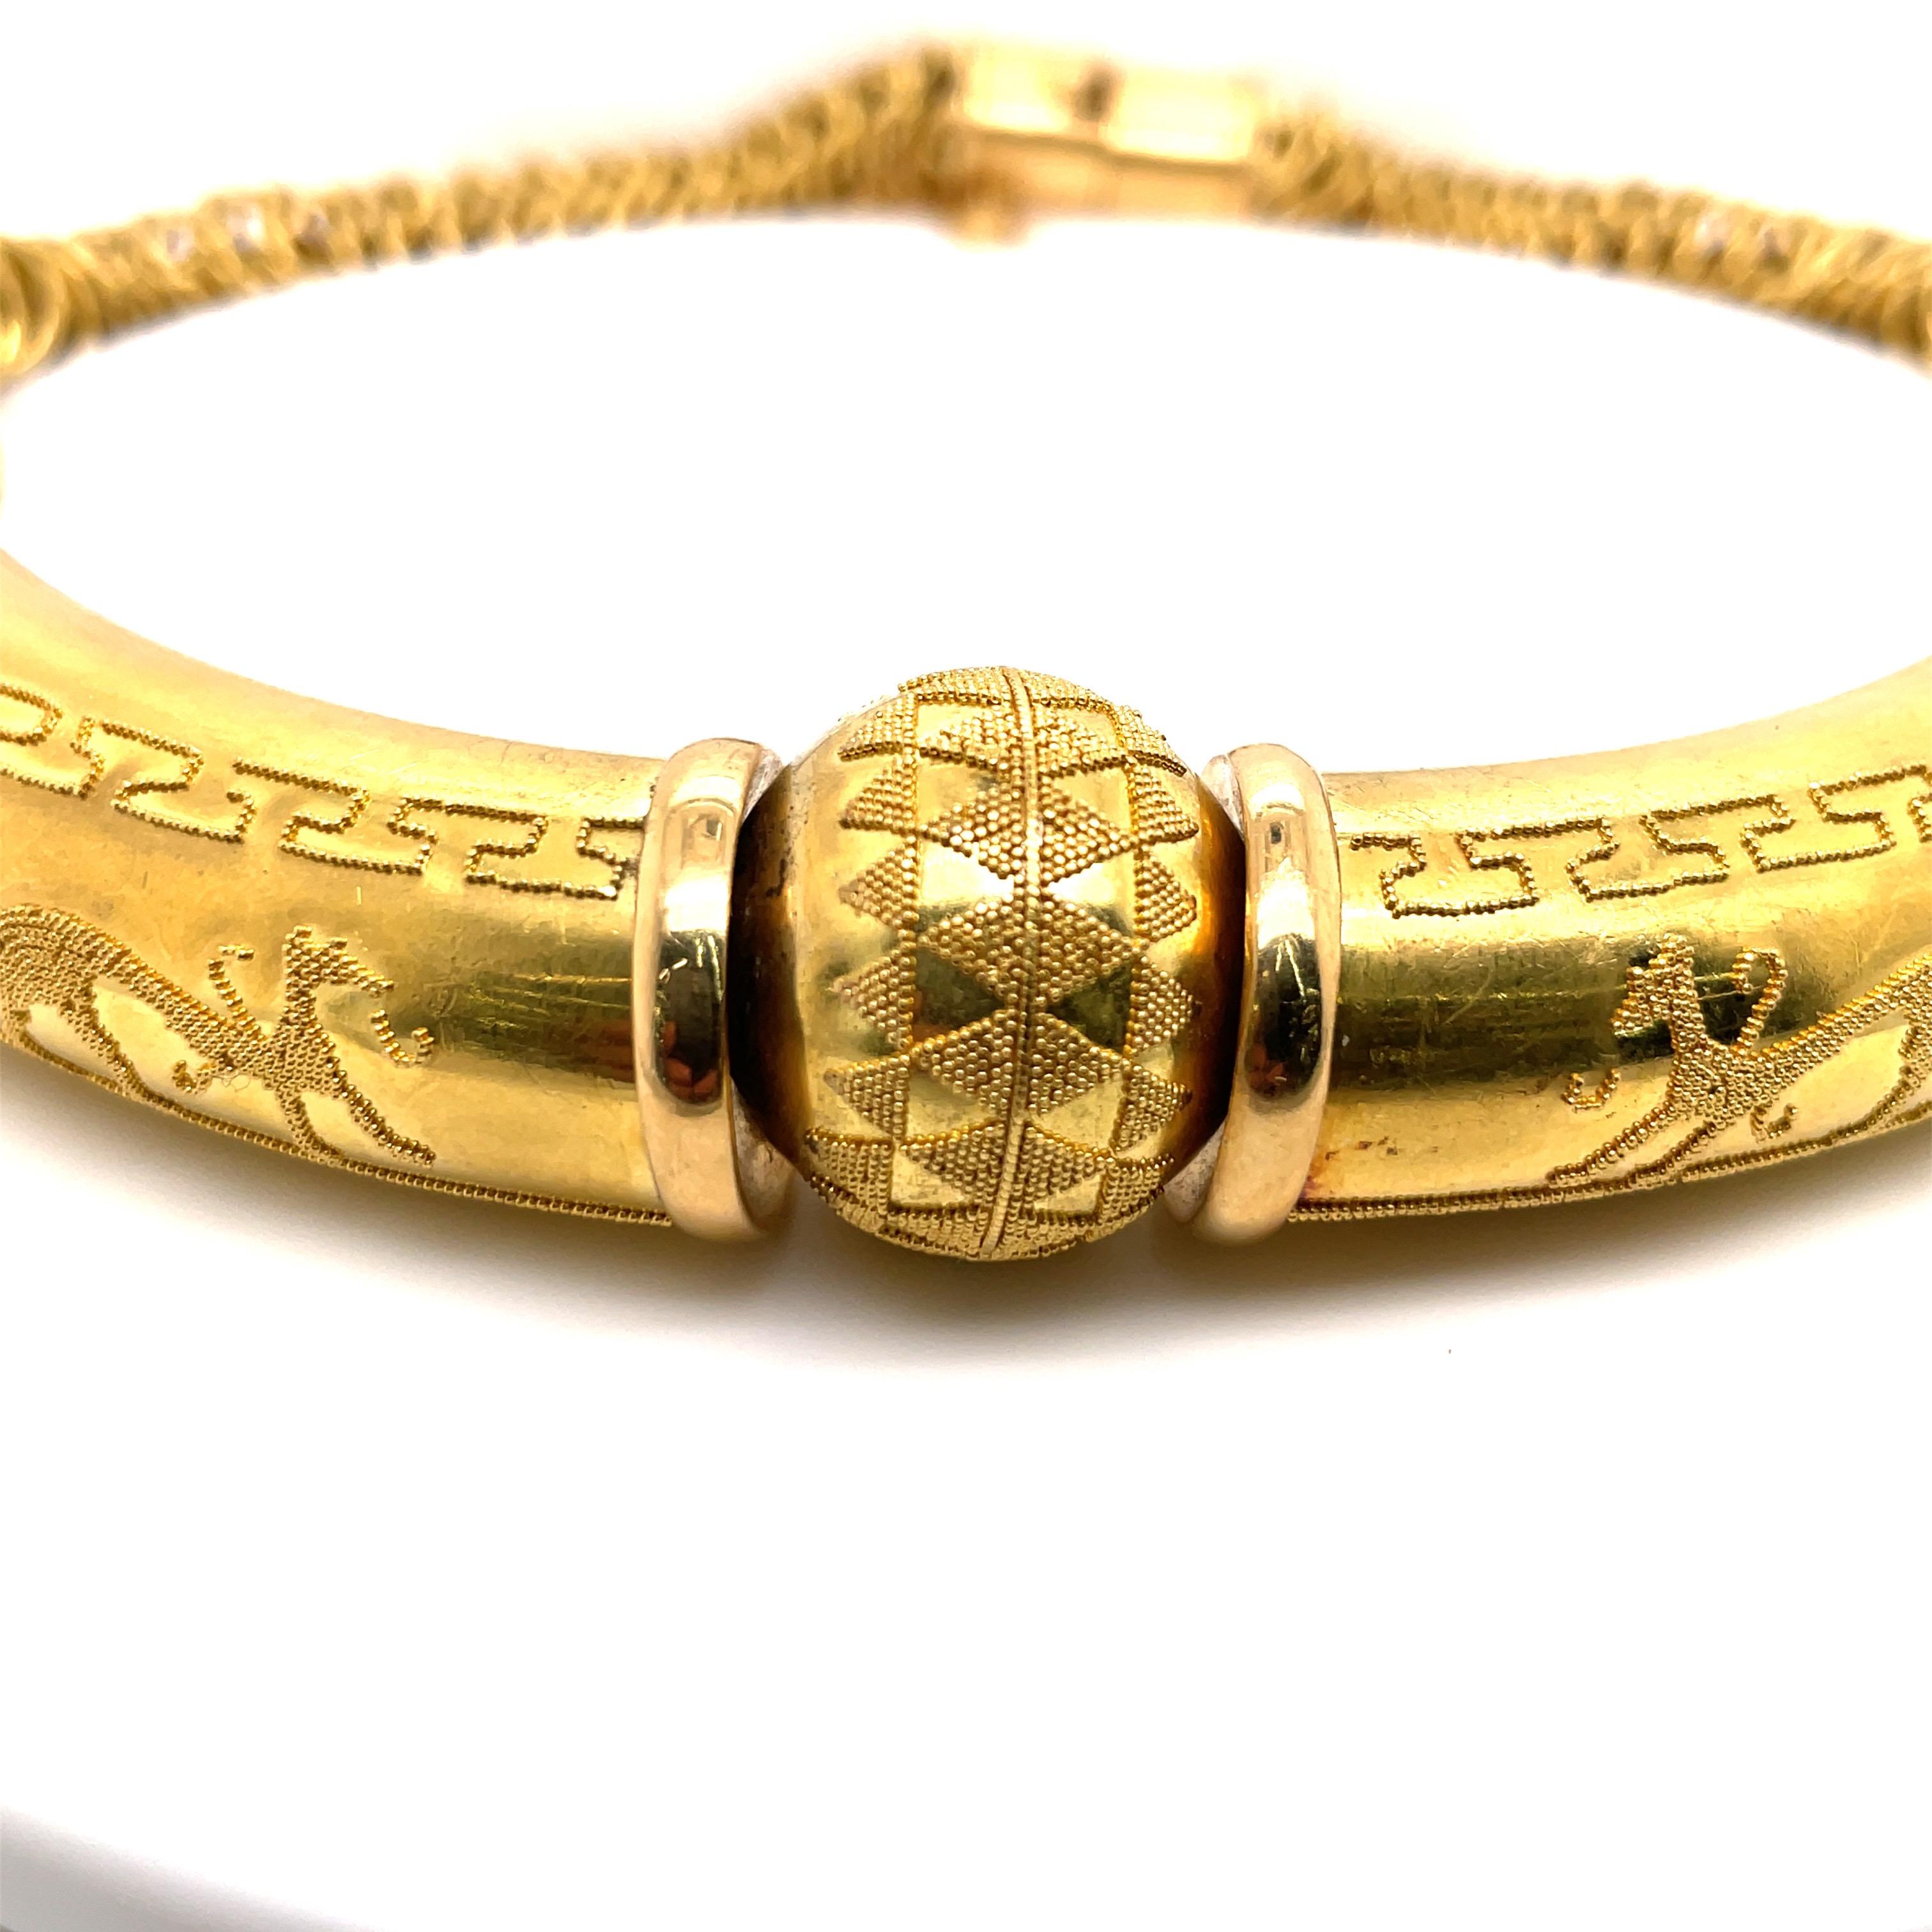 UnoAErre 18 Karat Yellow Gold Egyptian Style Collar Necklace 146.2 Grams Italy In Excellent Condition For Sale In New York, NY